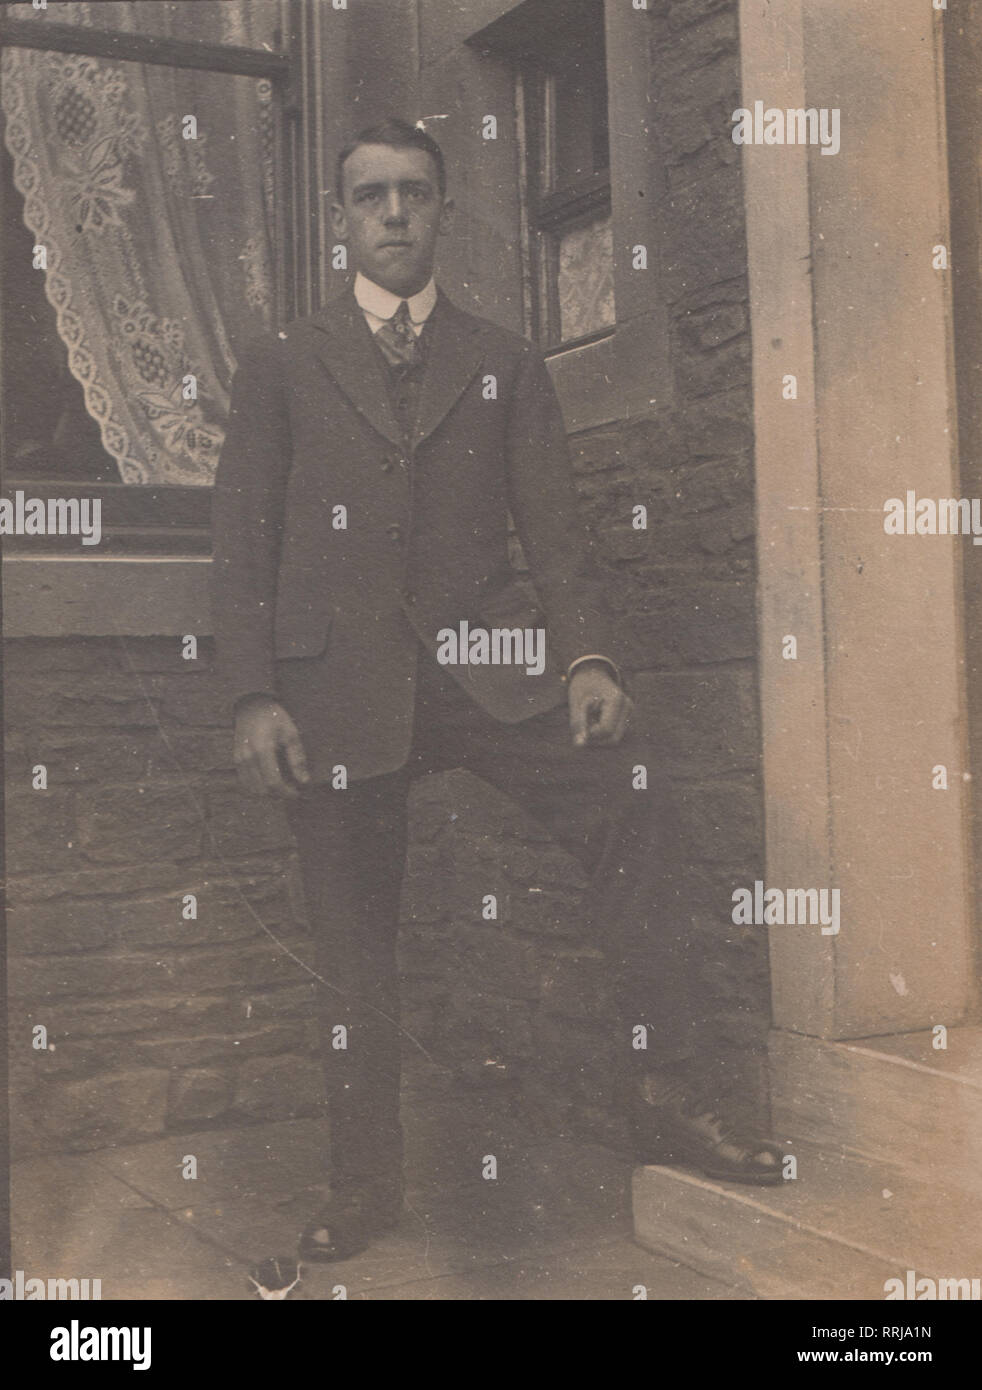 Vintage Edwardian Photographic Postcard Showing a Suited Man Stood Next To The Door of a House. Stock Photo